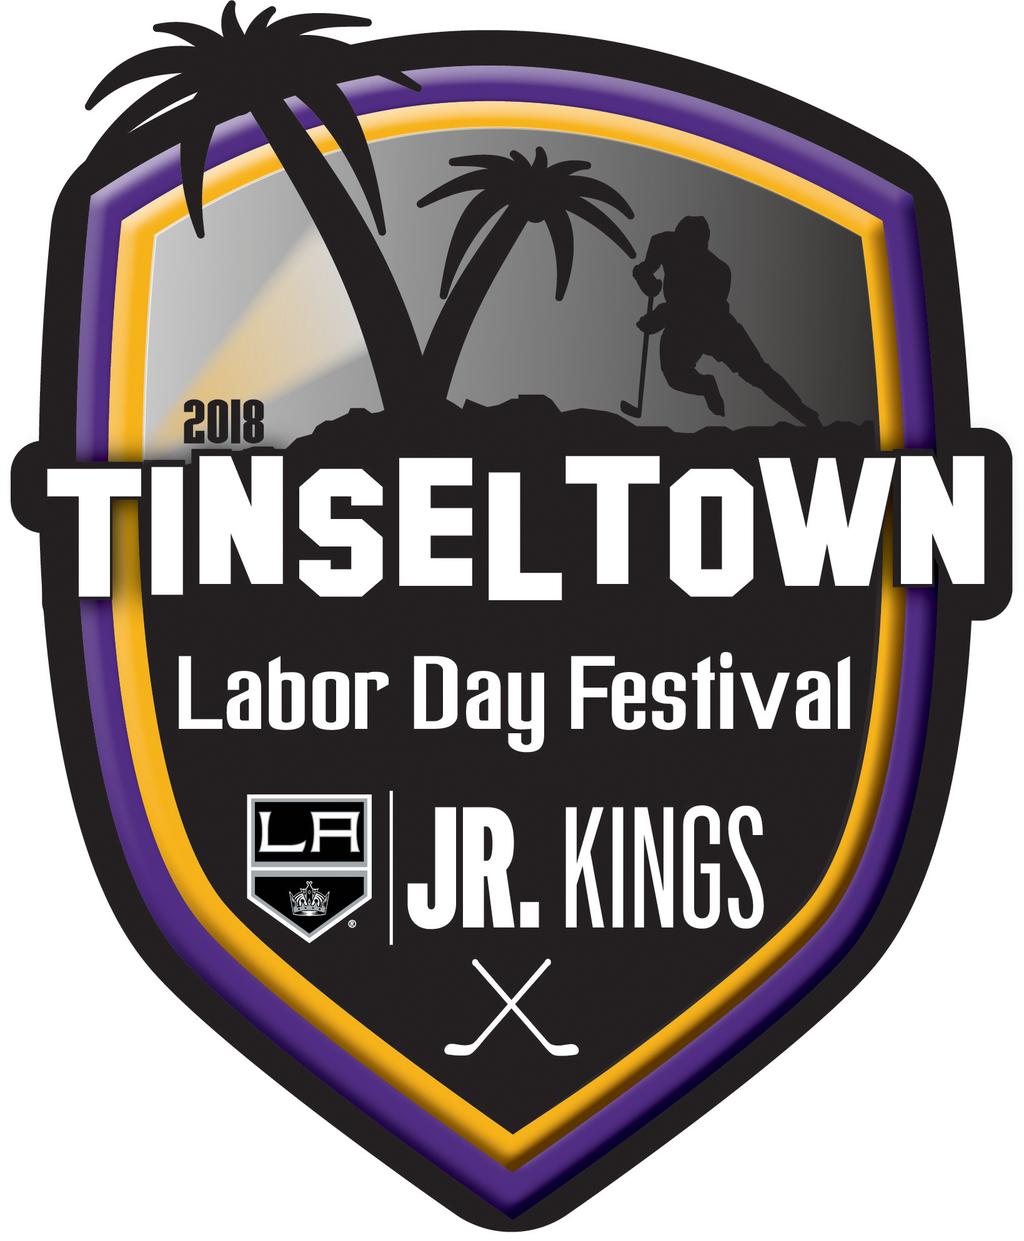 2018 LOS ANGELES JR. KINGS LABOR DAY FESTIVAL TOURNAMENT RULES REGISTRATION The registration fee is $1,795.00 for Squirt through Midget/High School divisions, $1,895.